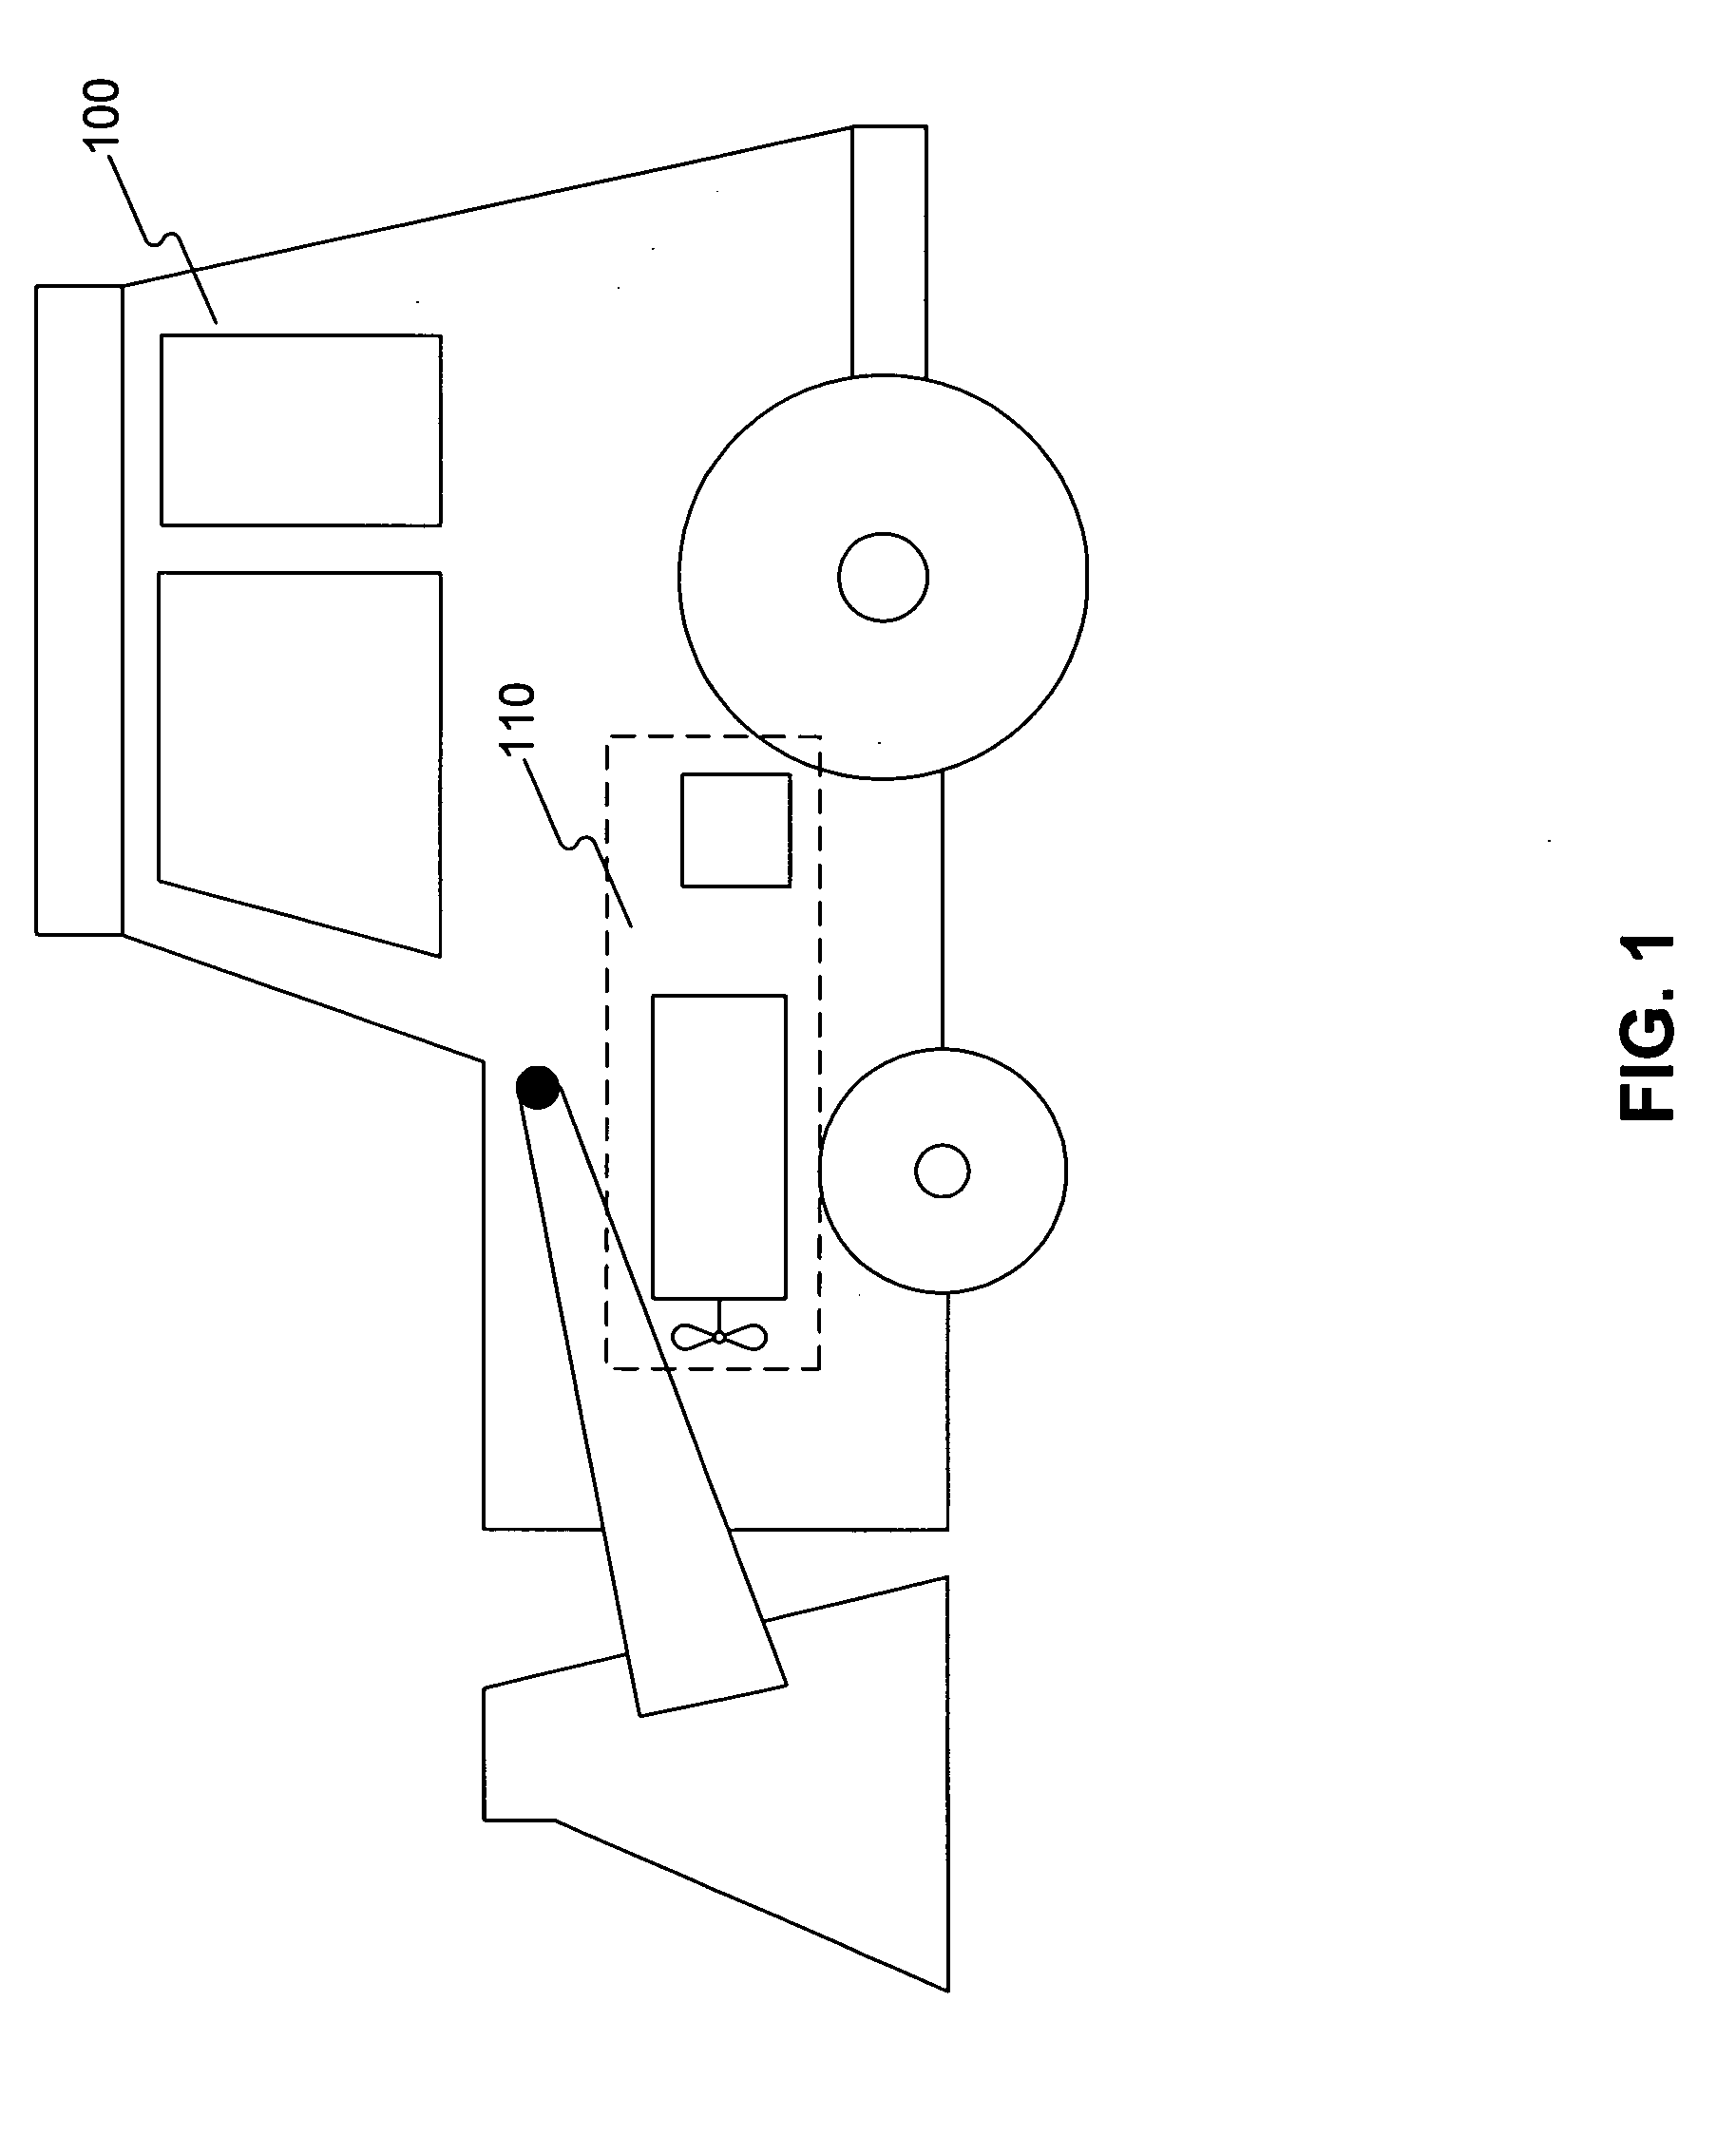 Thermoelectric generator and control system